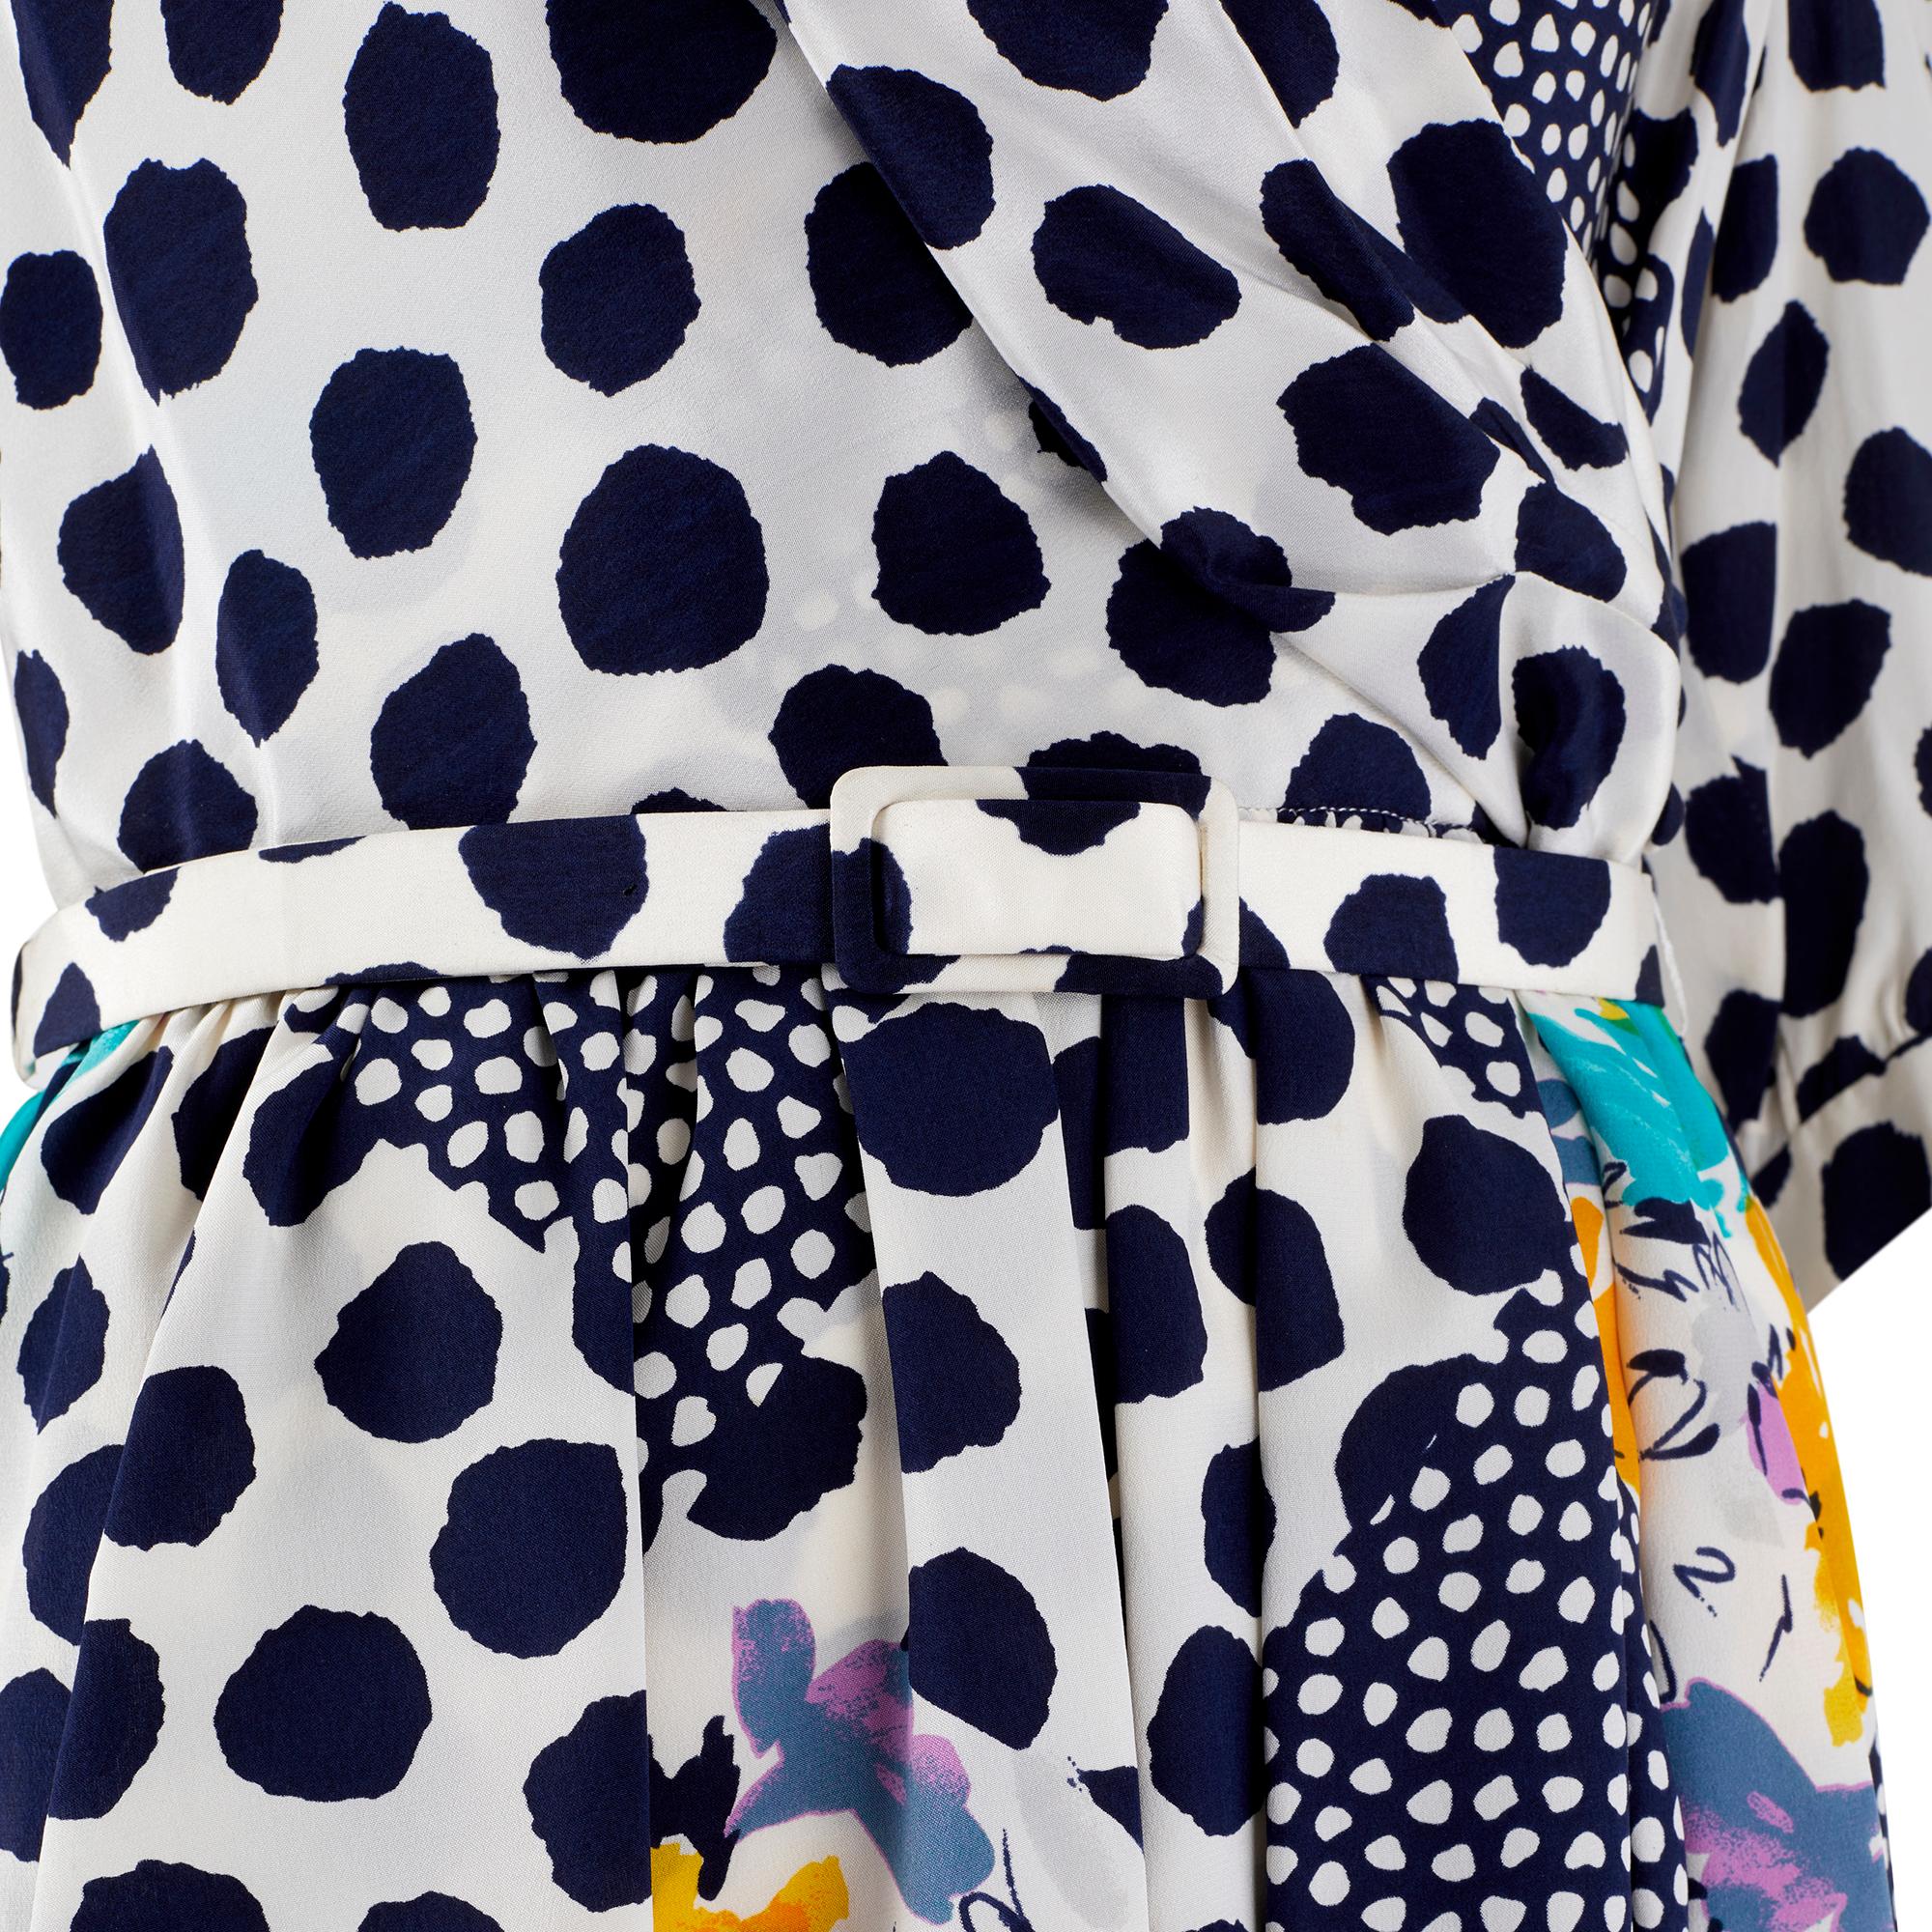 Women's 1980s Navy and White Polka Dot and Floral Dress For Sale